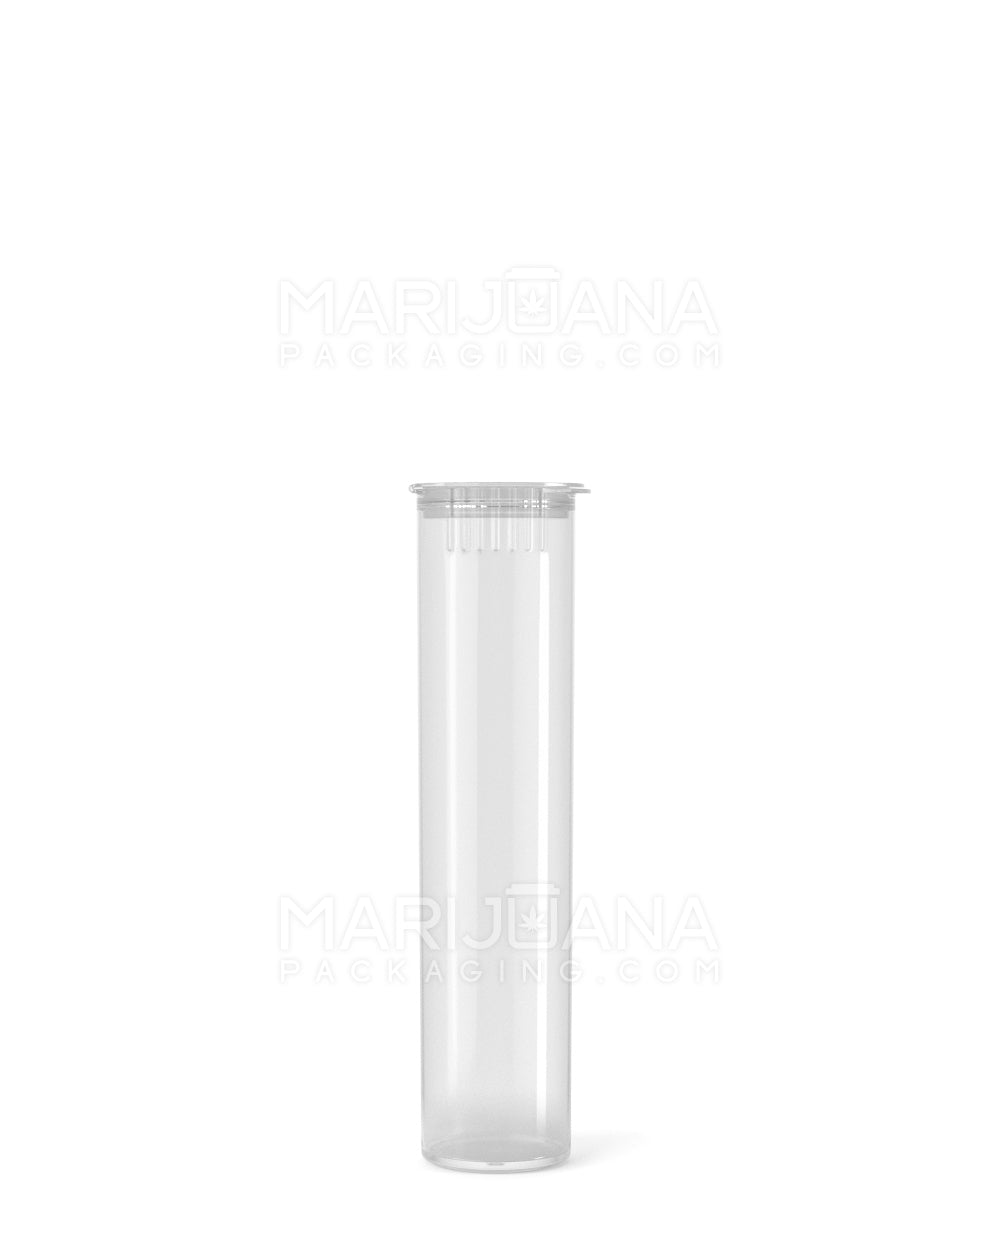 Child Resistant | Pop Top Plastic Pre-Roll Tubes | 80mm - Clear - 1000 Count - 2